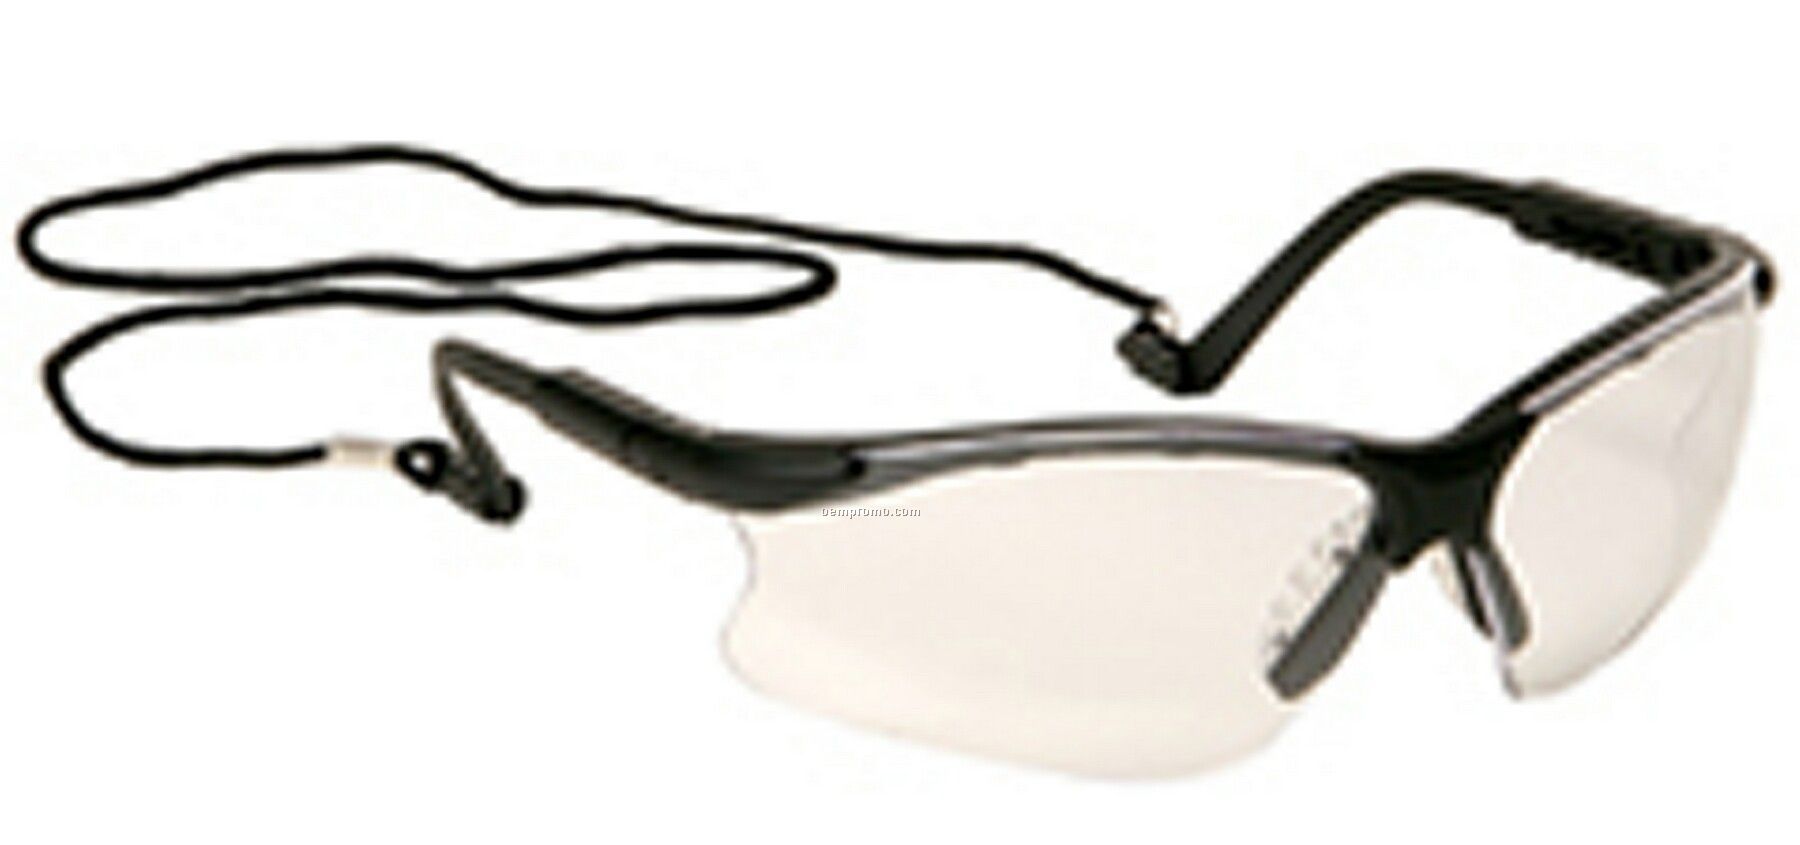 Hawk Safety Glasses W/ Clear Lenses